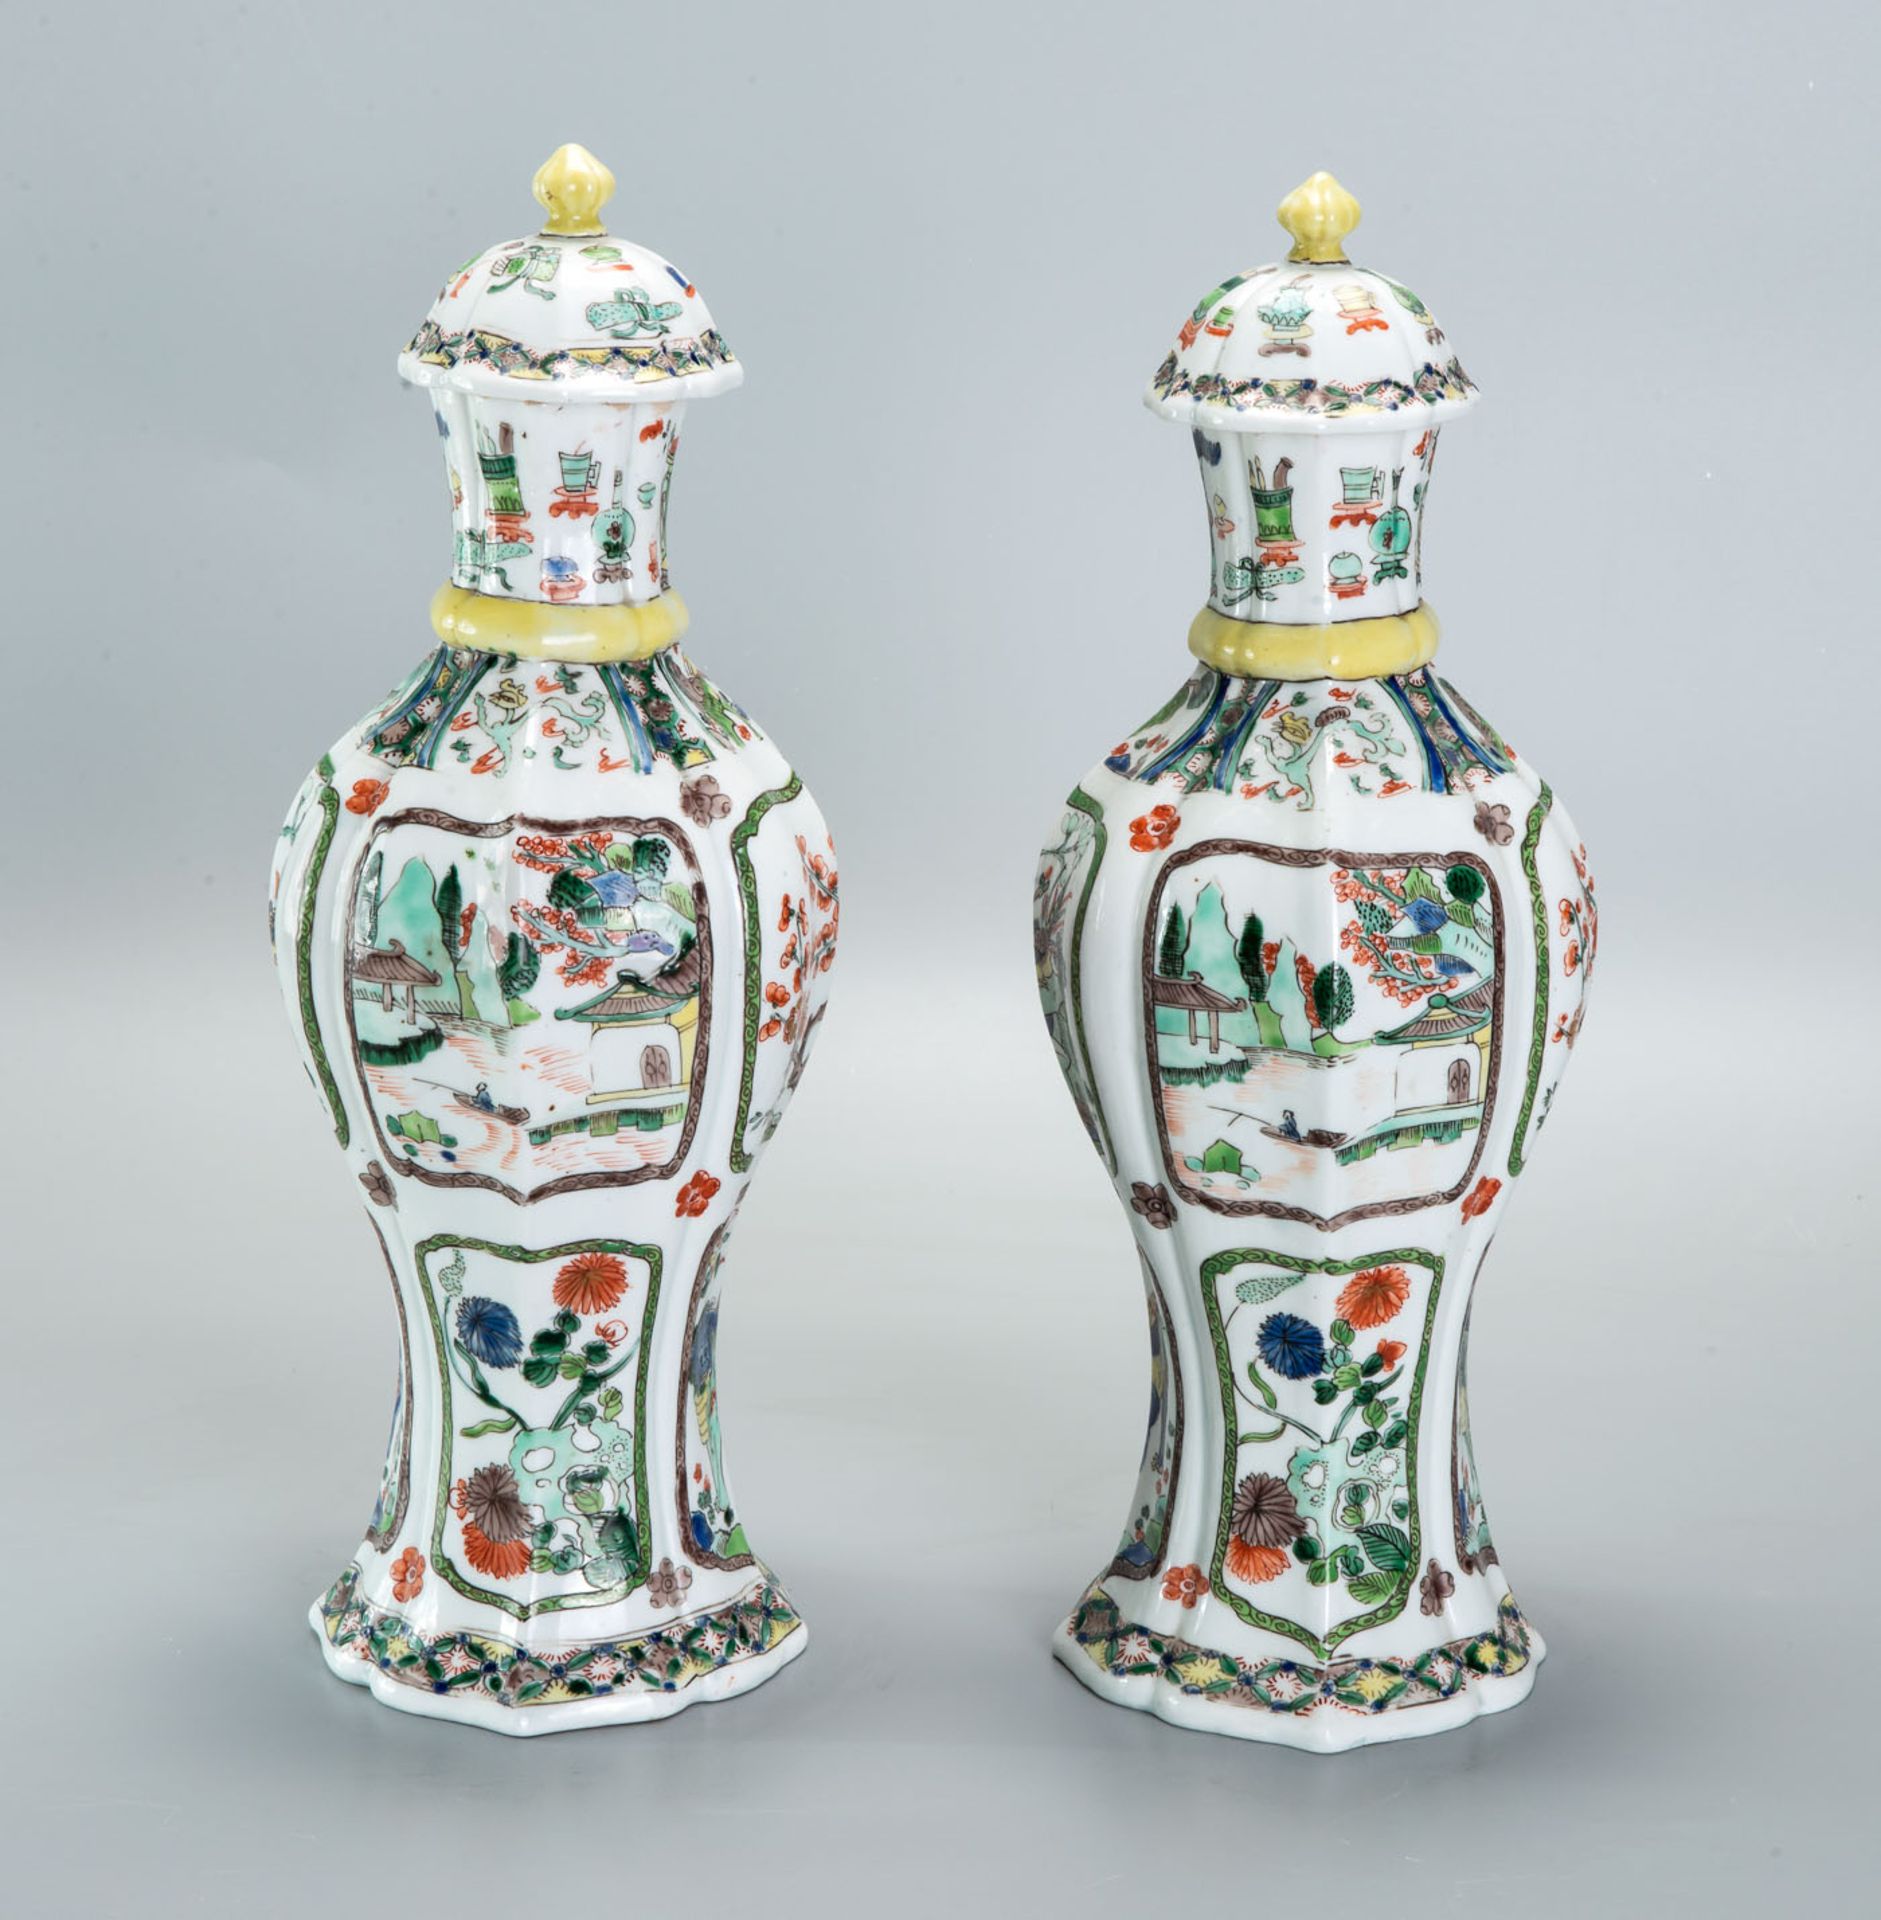 A Pair of Wucai Stoneware Lidded Vases, China, Qing Dynasty, 18th Century - Image 2 of 6